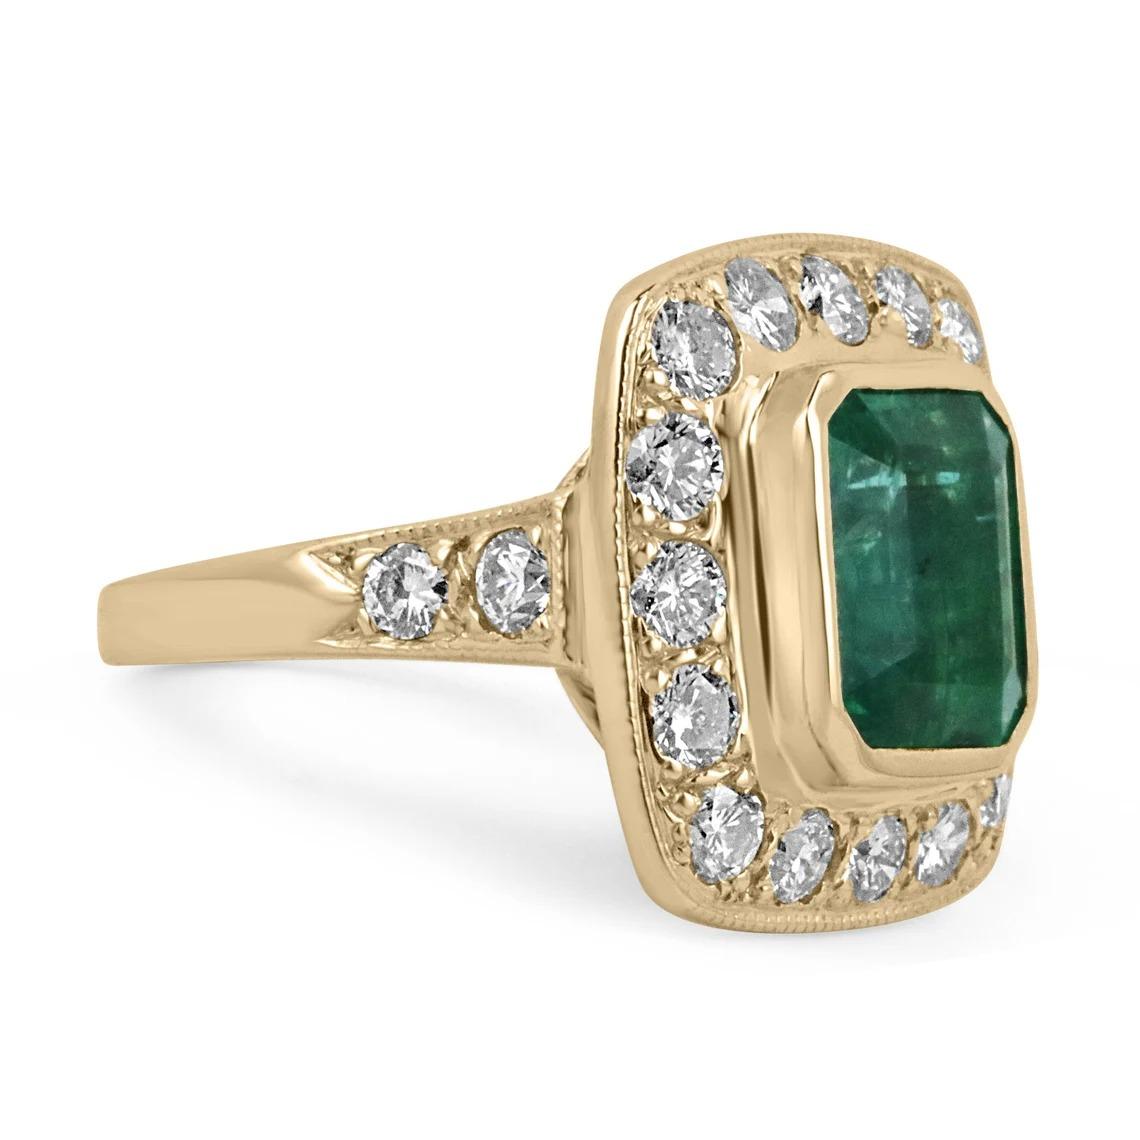 A remarkable hand-created ring, designed and created by our own Master Jeweler 